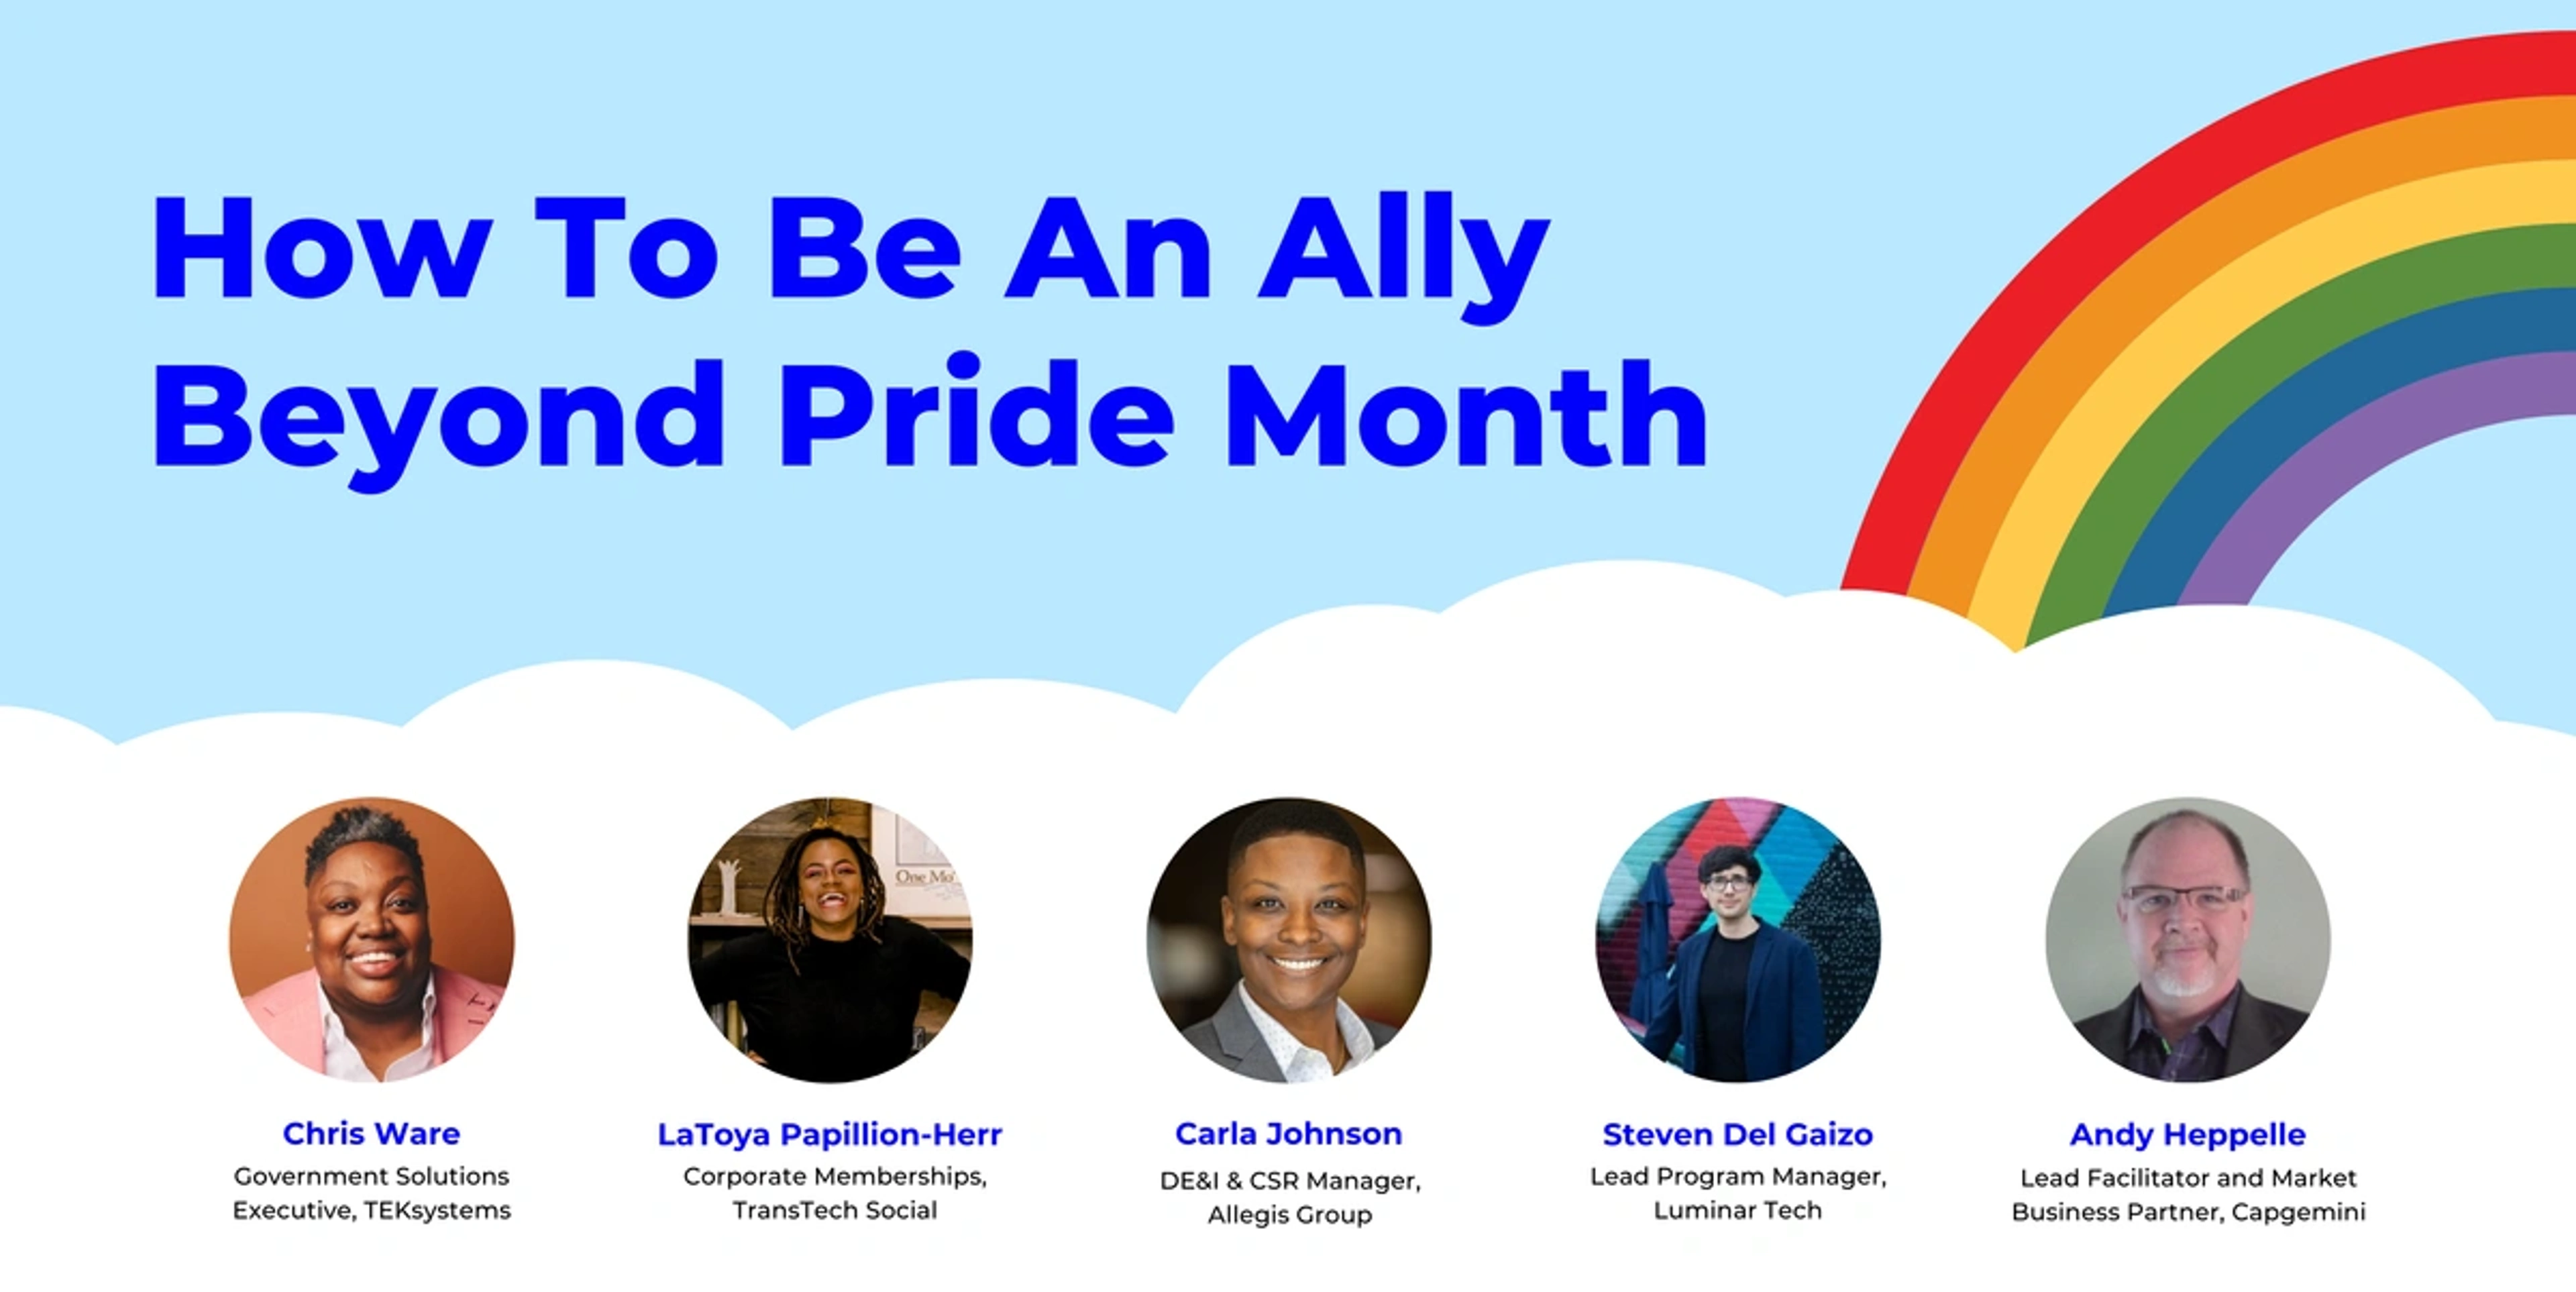 How to be an ally beyond pride month with speaker images on it.